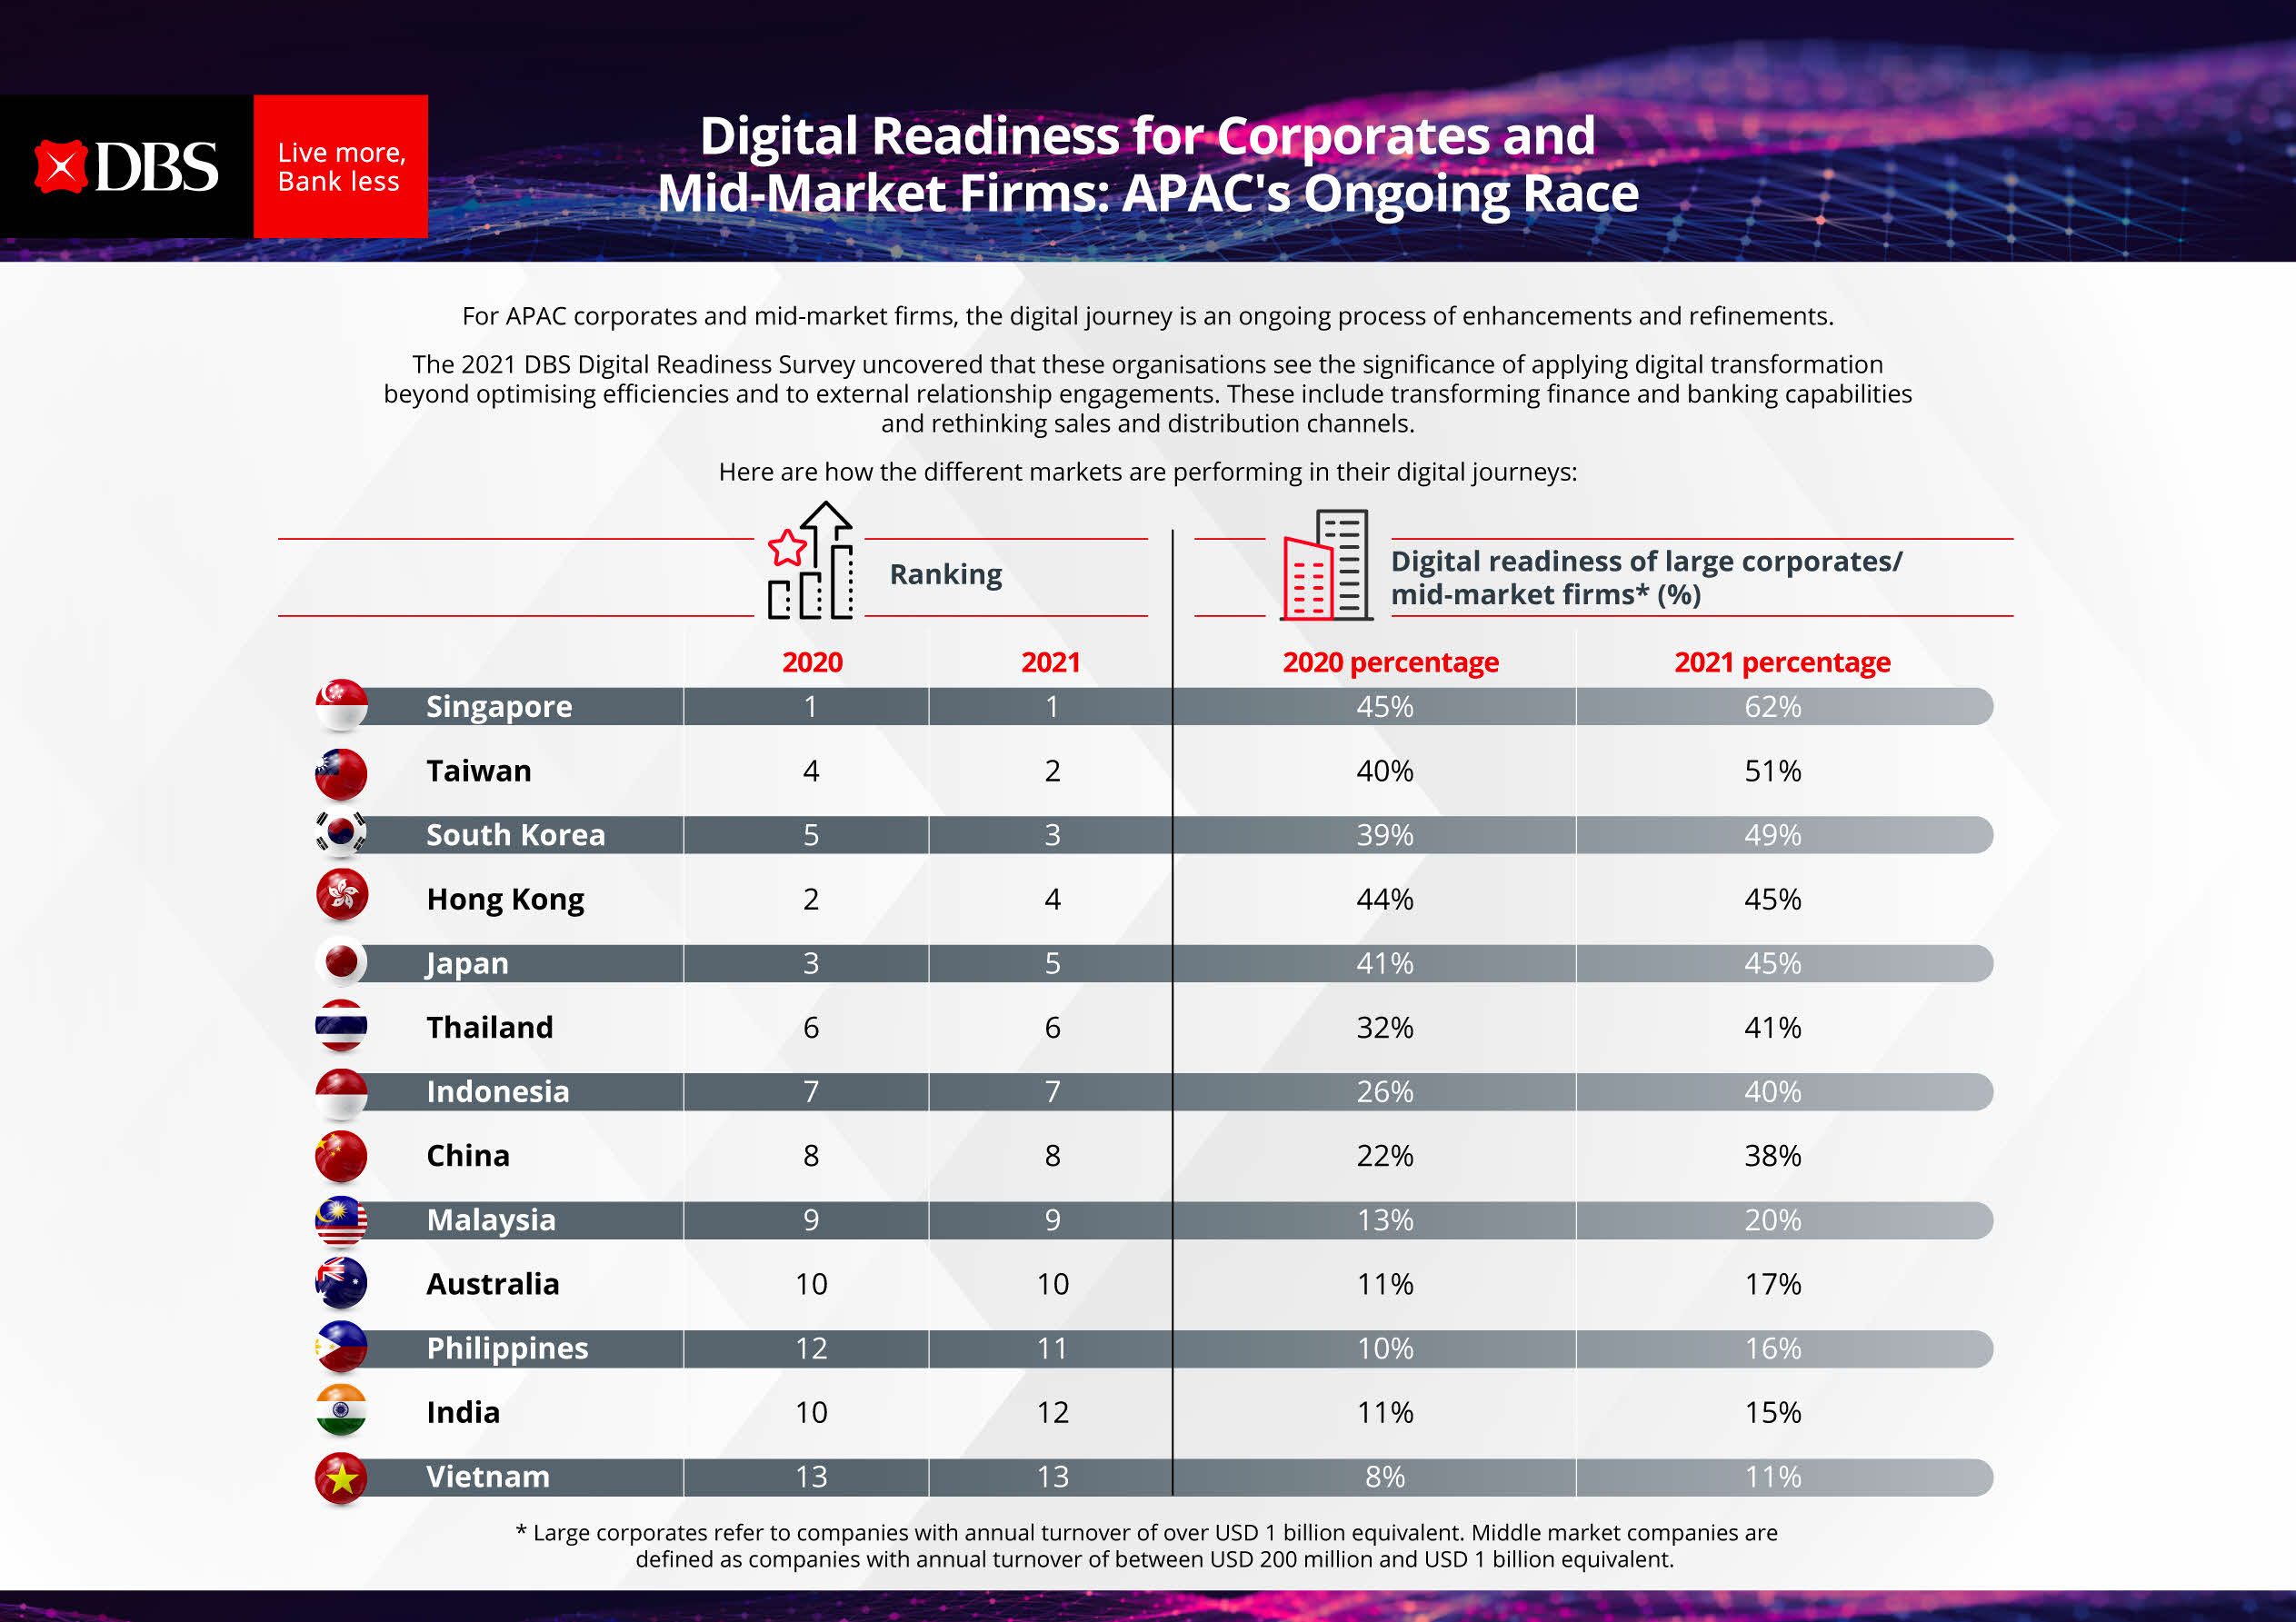 Digital-Readiness-Ranking-by-markets-Infographic